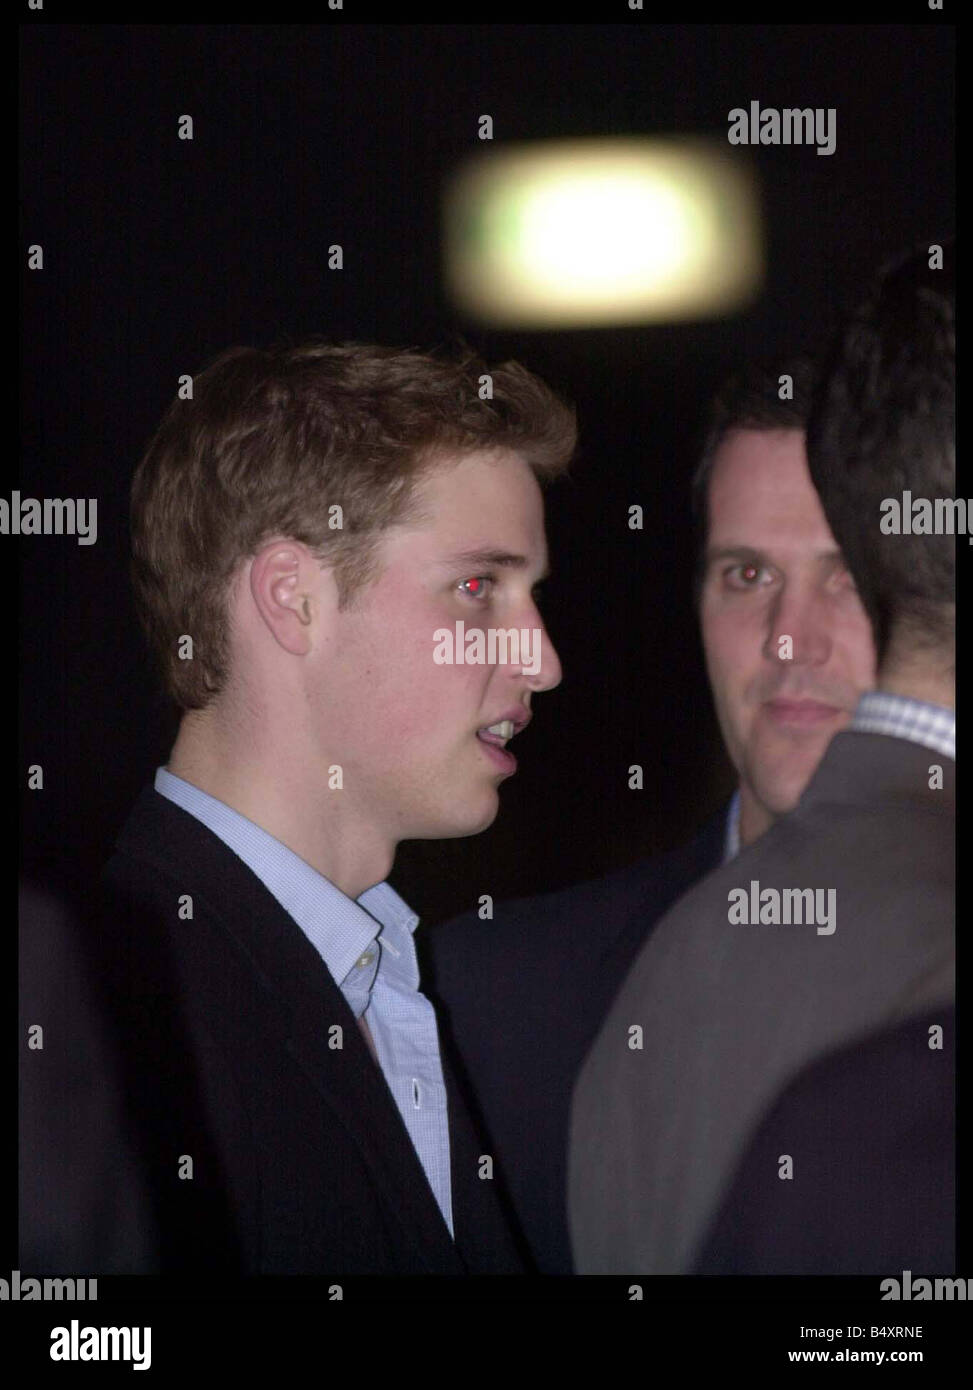 PRINCE WILLIAM ARRIVES AT A UNIVERSITY FASHION SHOW AT ST ANDREWS UNI 26 03 02 SEE BRIAN MC CARTNEY FOR COPY DETAILS PIC LEWIS HOUGHTON 07990 823 936 128 CHURCH STREET TRANENT EAST LOTHIAN EH33 1BL ALL REPROS MUST BE PAID Stock Photo